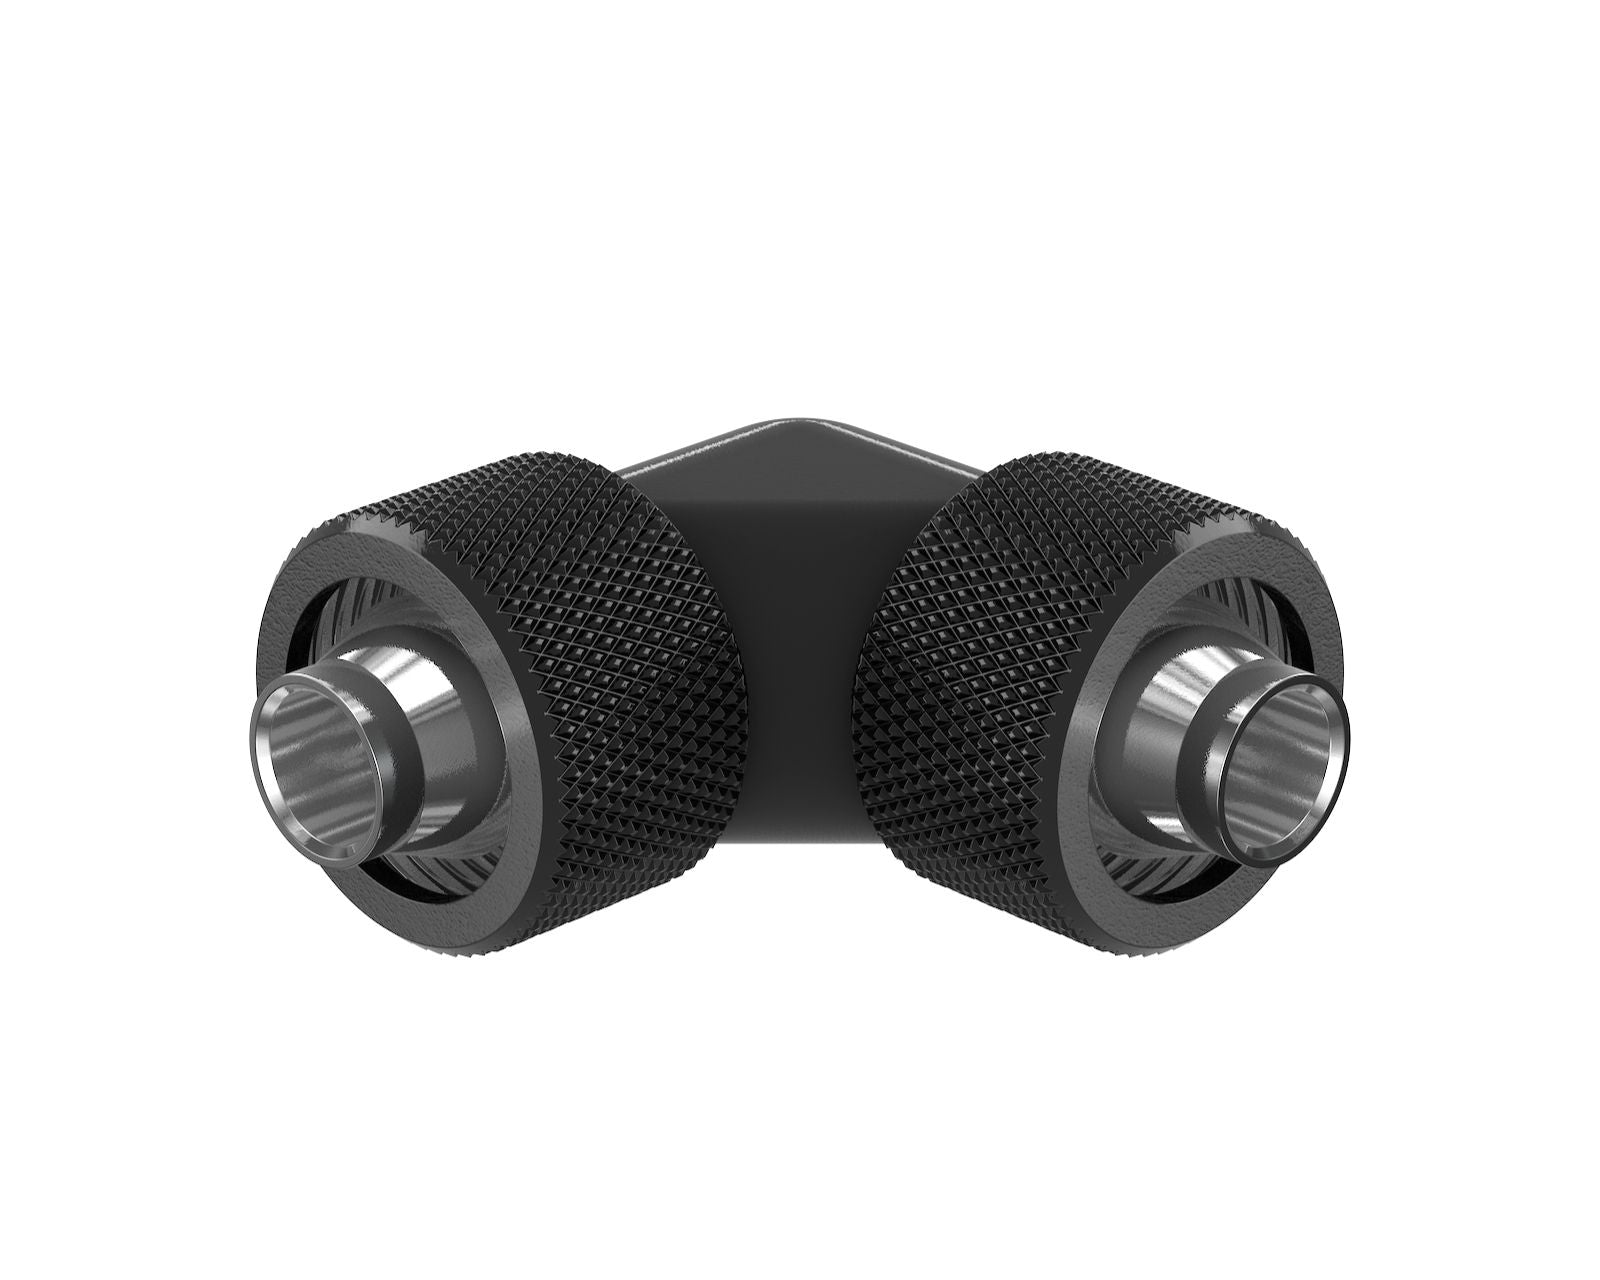 PrimoChill SecureFit SX - Premium 90 Degree Compression Fitting Set For 3/8in ID x 5/8in OD Flexible Tubing (F-SFSX5890) - Available in 20+ Colors, Custom Watercooling Loop Ready - Satin Black